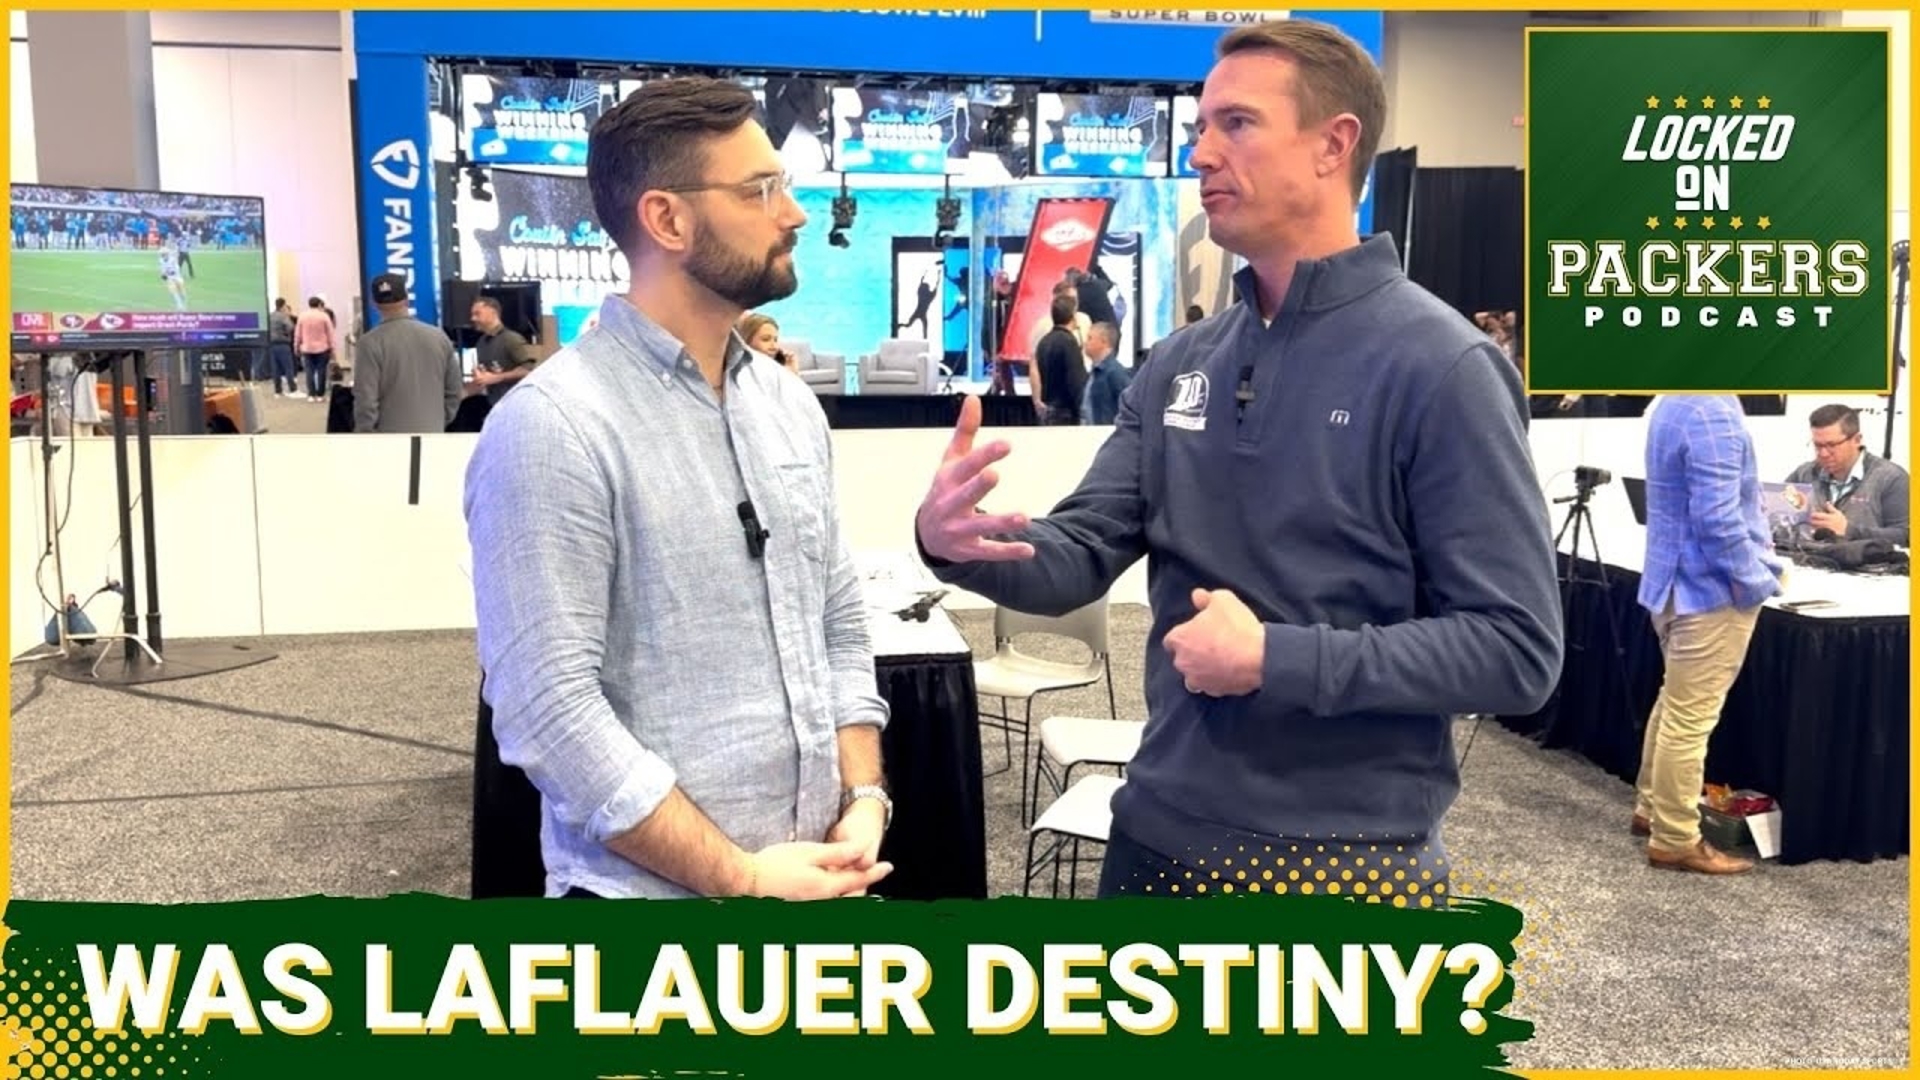 What's next for Matt LaFleur? The latest in our "What's next?" series focuses on the Packers head coach and features his former pupil in Atlanta, Matt Ryan.